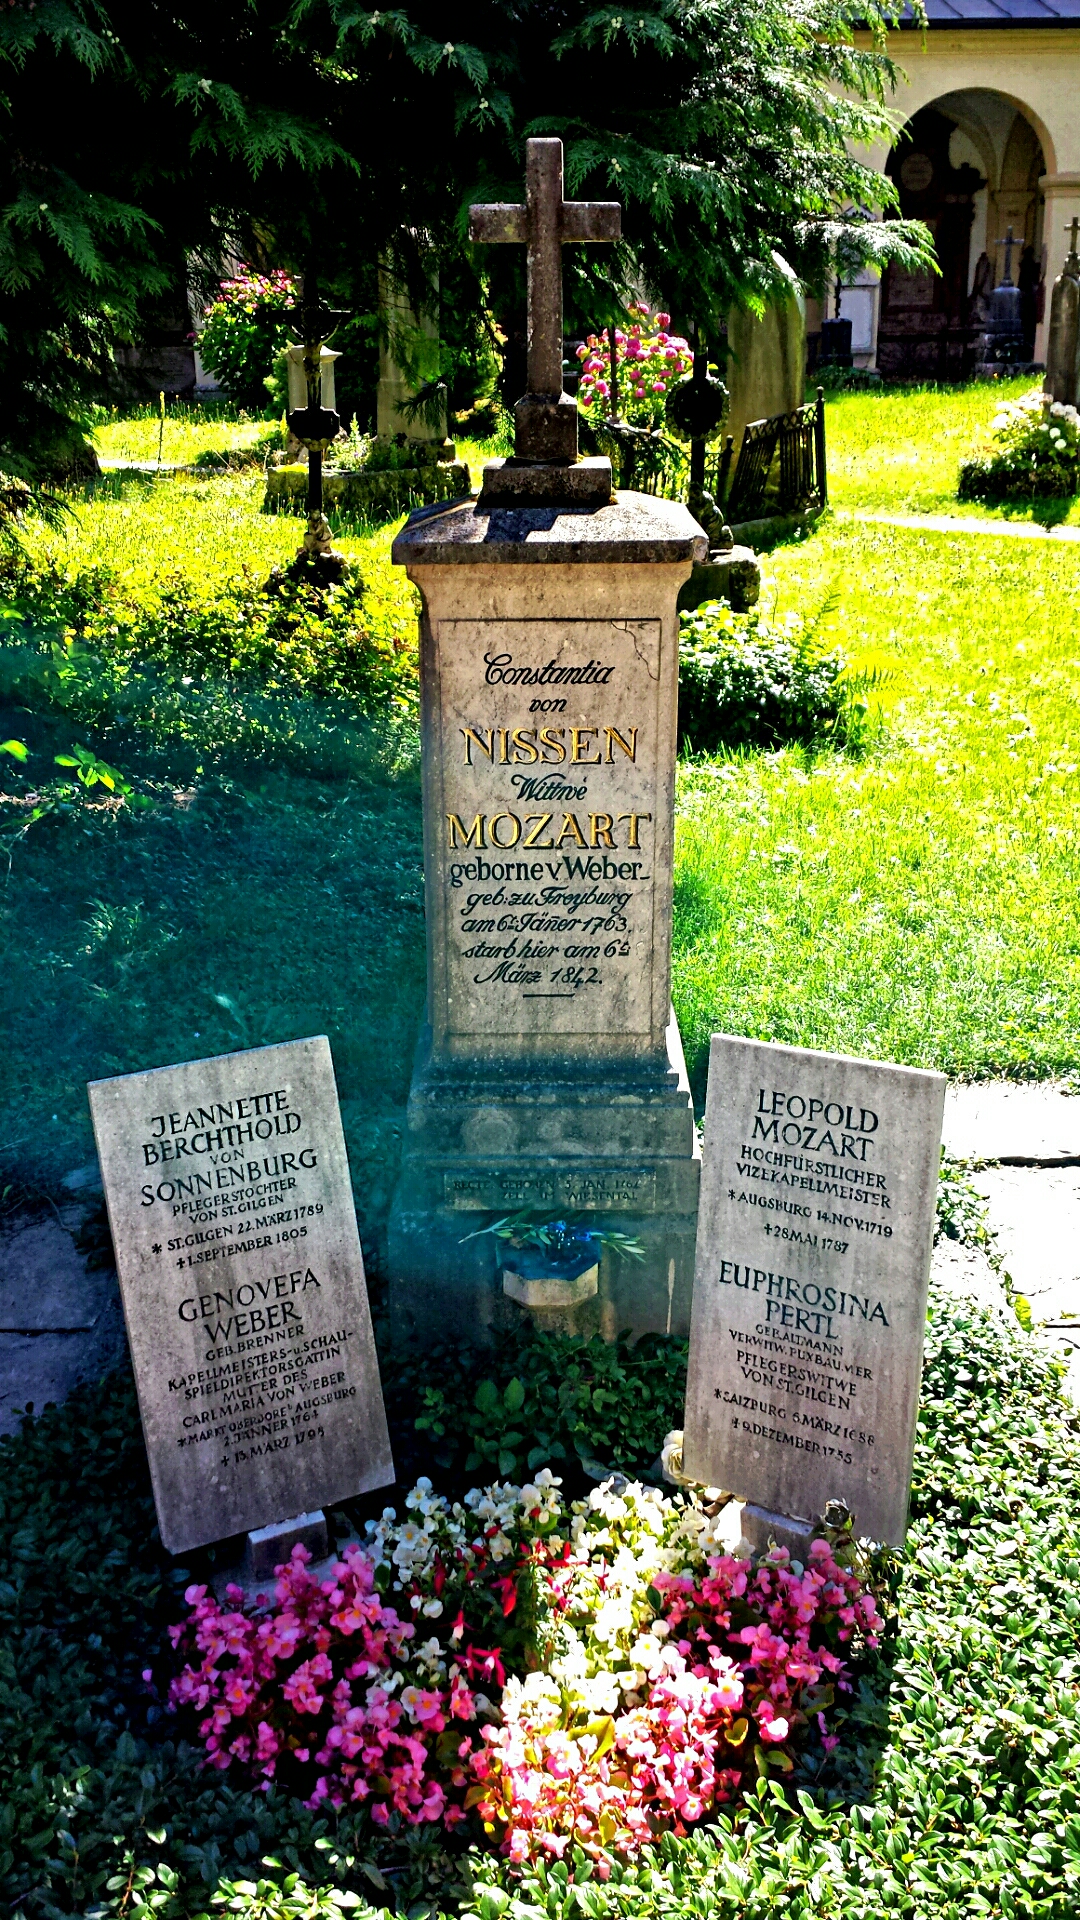 Burial site of Leopold Mozart and other Mozart relatives